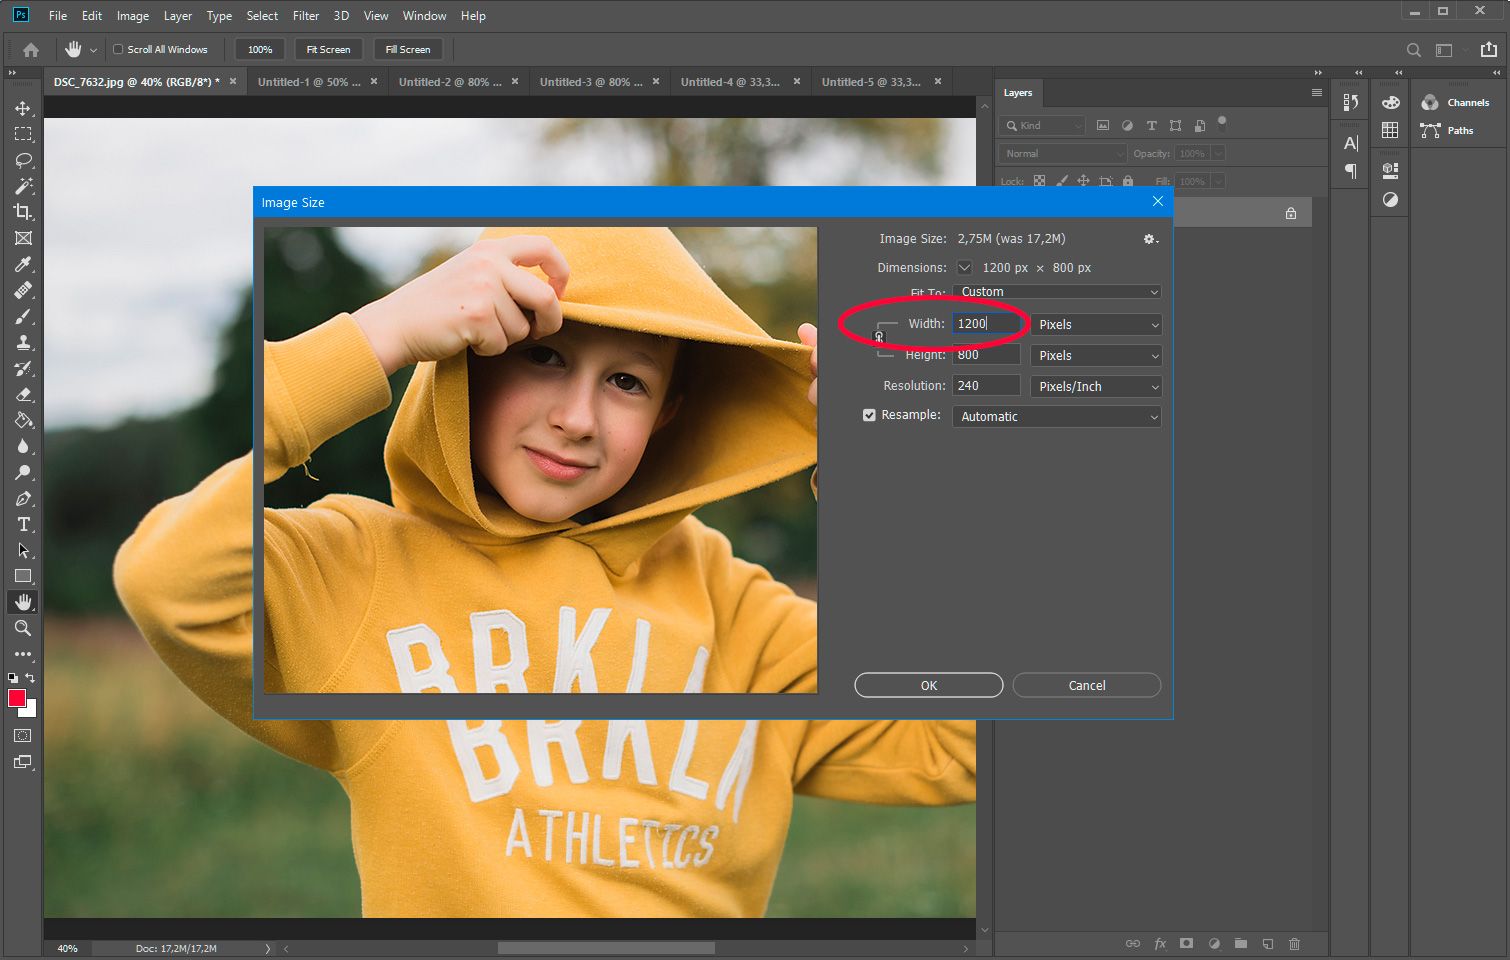 Change image size in KB or MB..